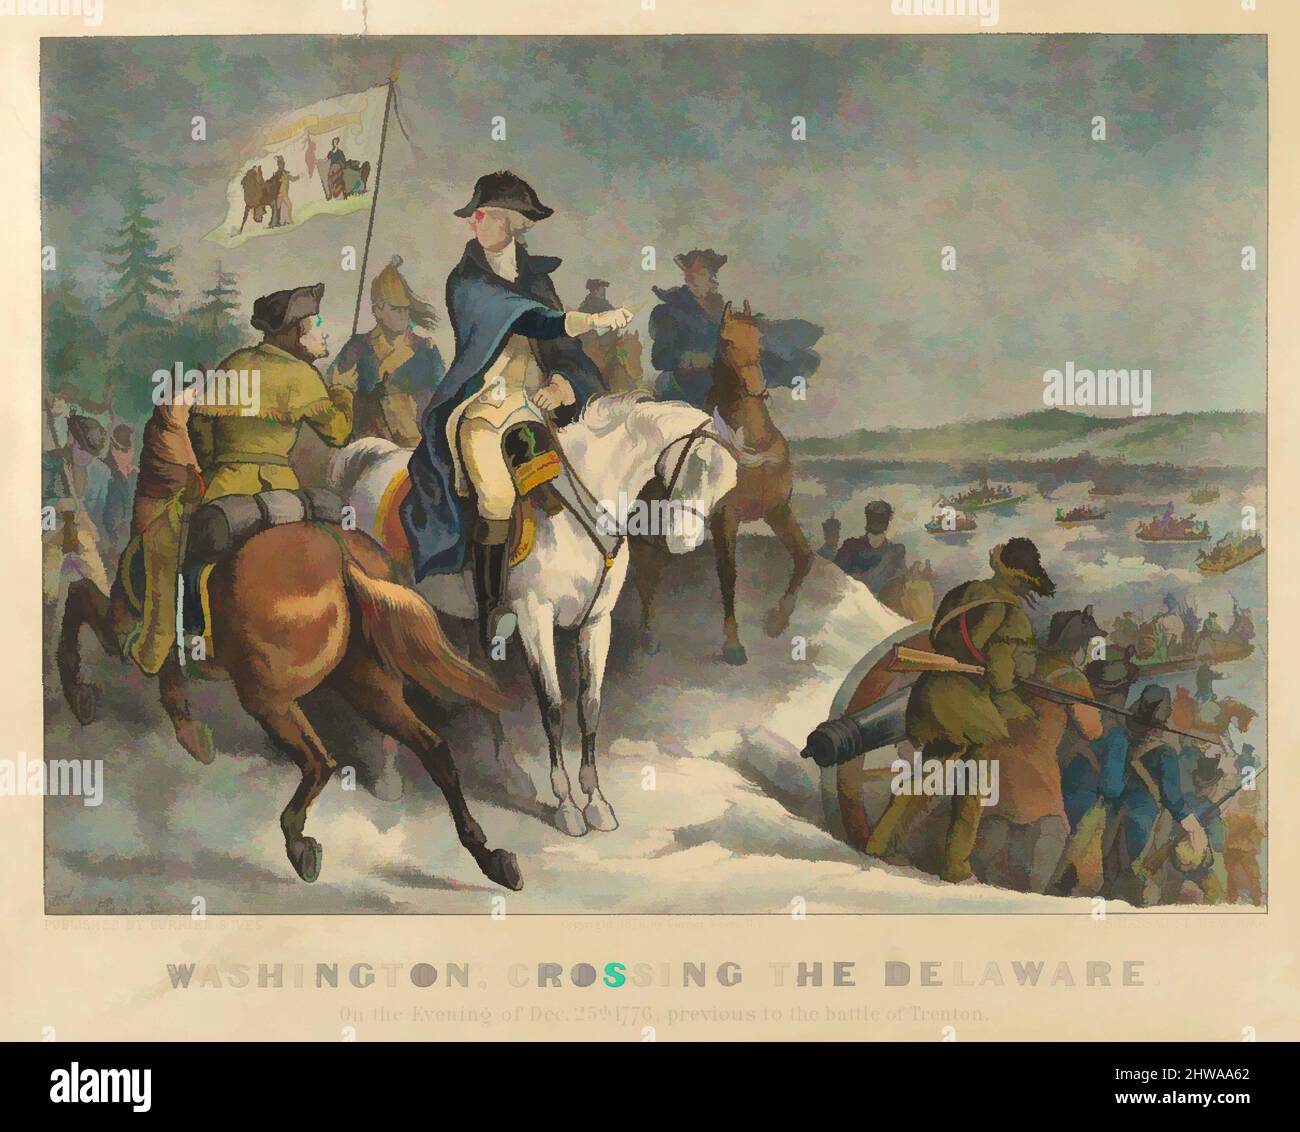 Art inspired by Drawings and Prints, Washington, Crossing the Delaware–On the Evening of Dec. 25th 1776, previous to the Battle of Trenton, Classic works modernized by Artotop with a splash of modernity. Shapes, color and value, eye-catching visual impact on art. Emotions through freedom of artworks in a contemporary way. A timeless message pursuing a wildly creative new direction. Artists turning to the digital medium and creating the Artotop NFT Stock Photo